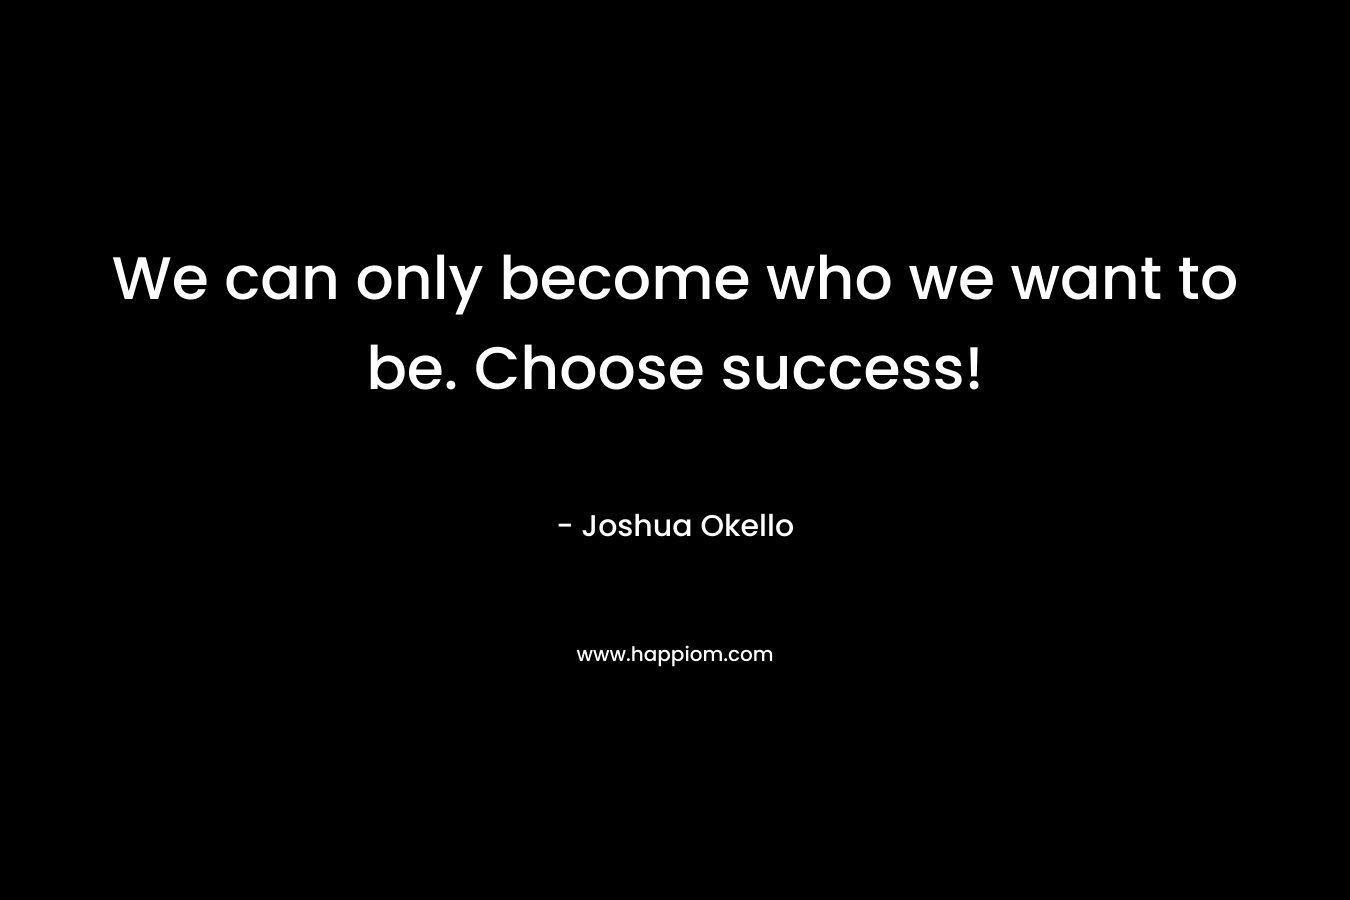 We can only become who we want to be. Choose success!